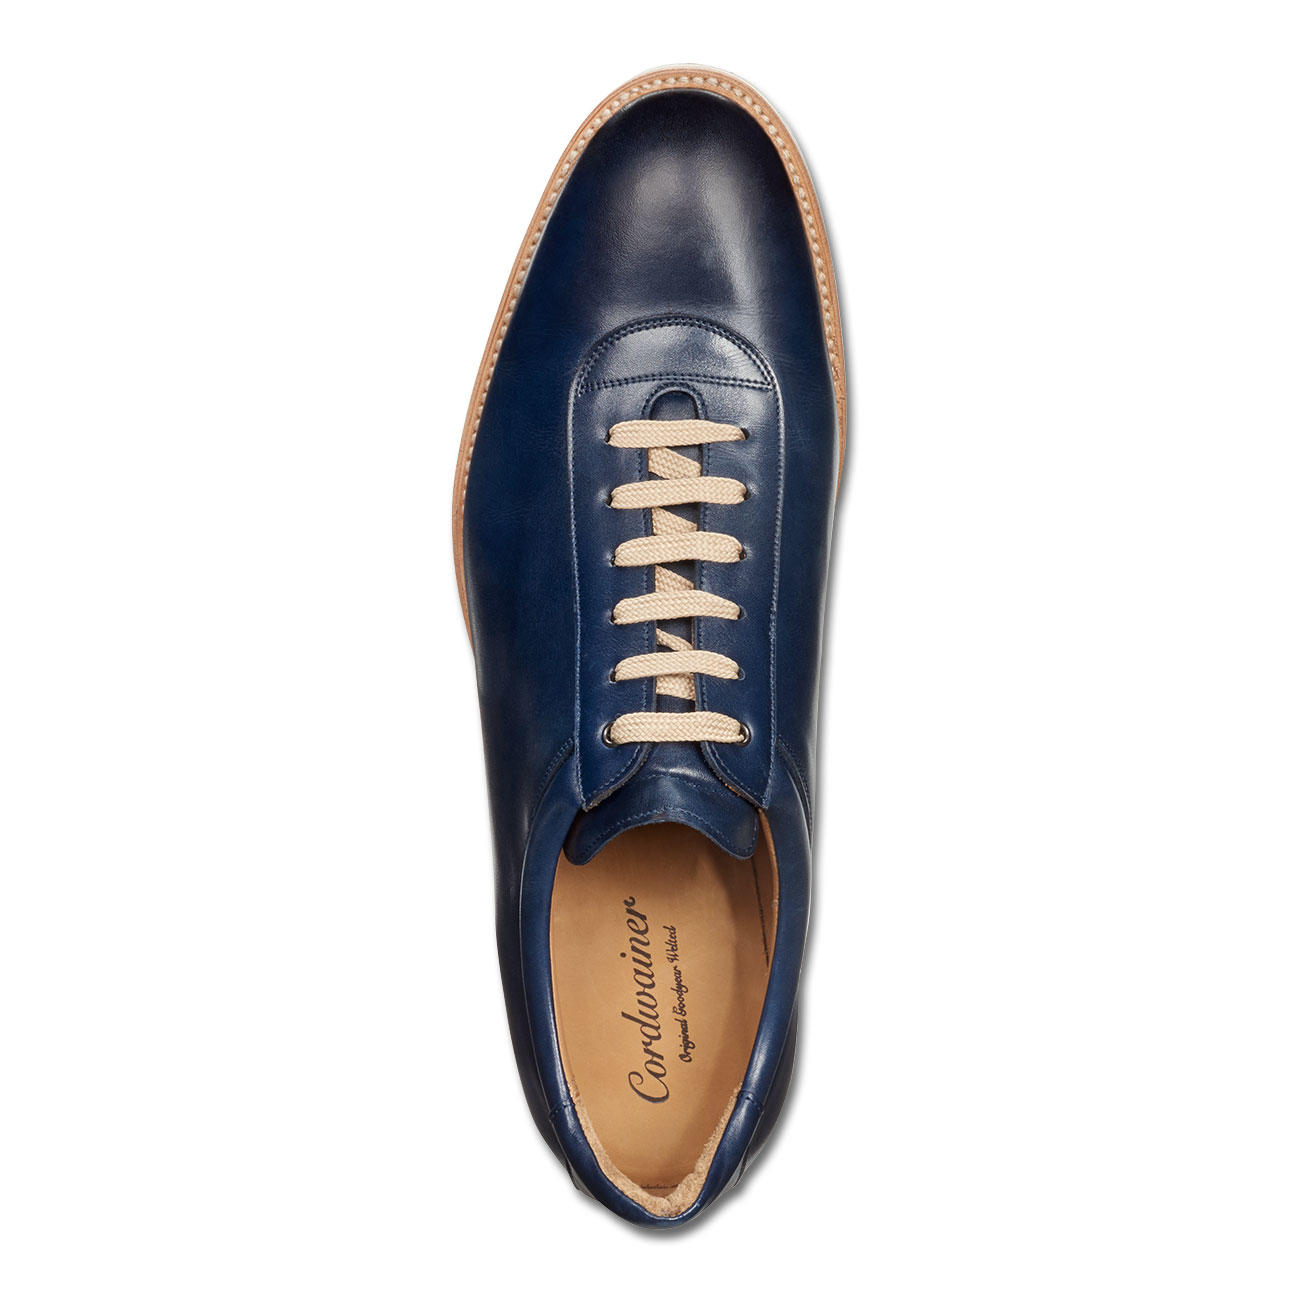 cordwainers shoes online